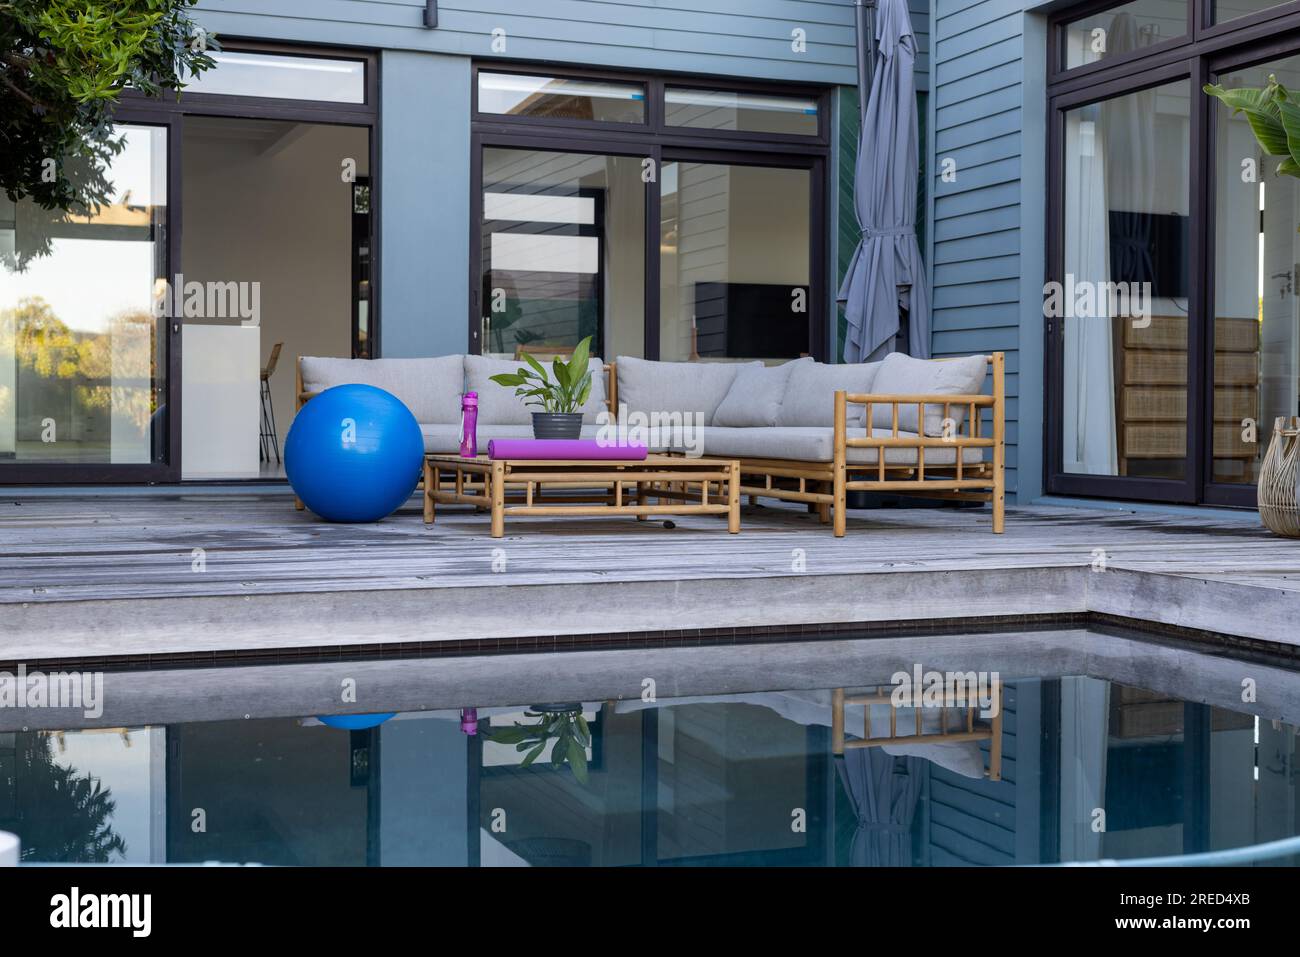 General view of terrace with swimming pool, sofa and fitness equipment Stock Photo